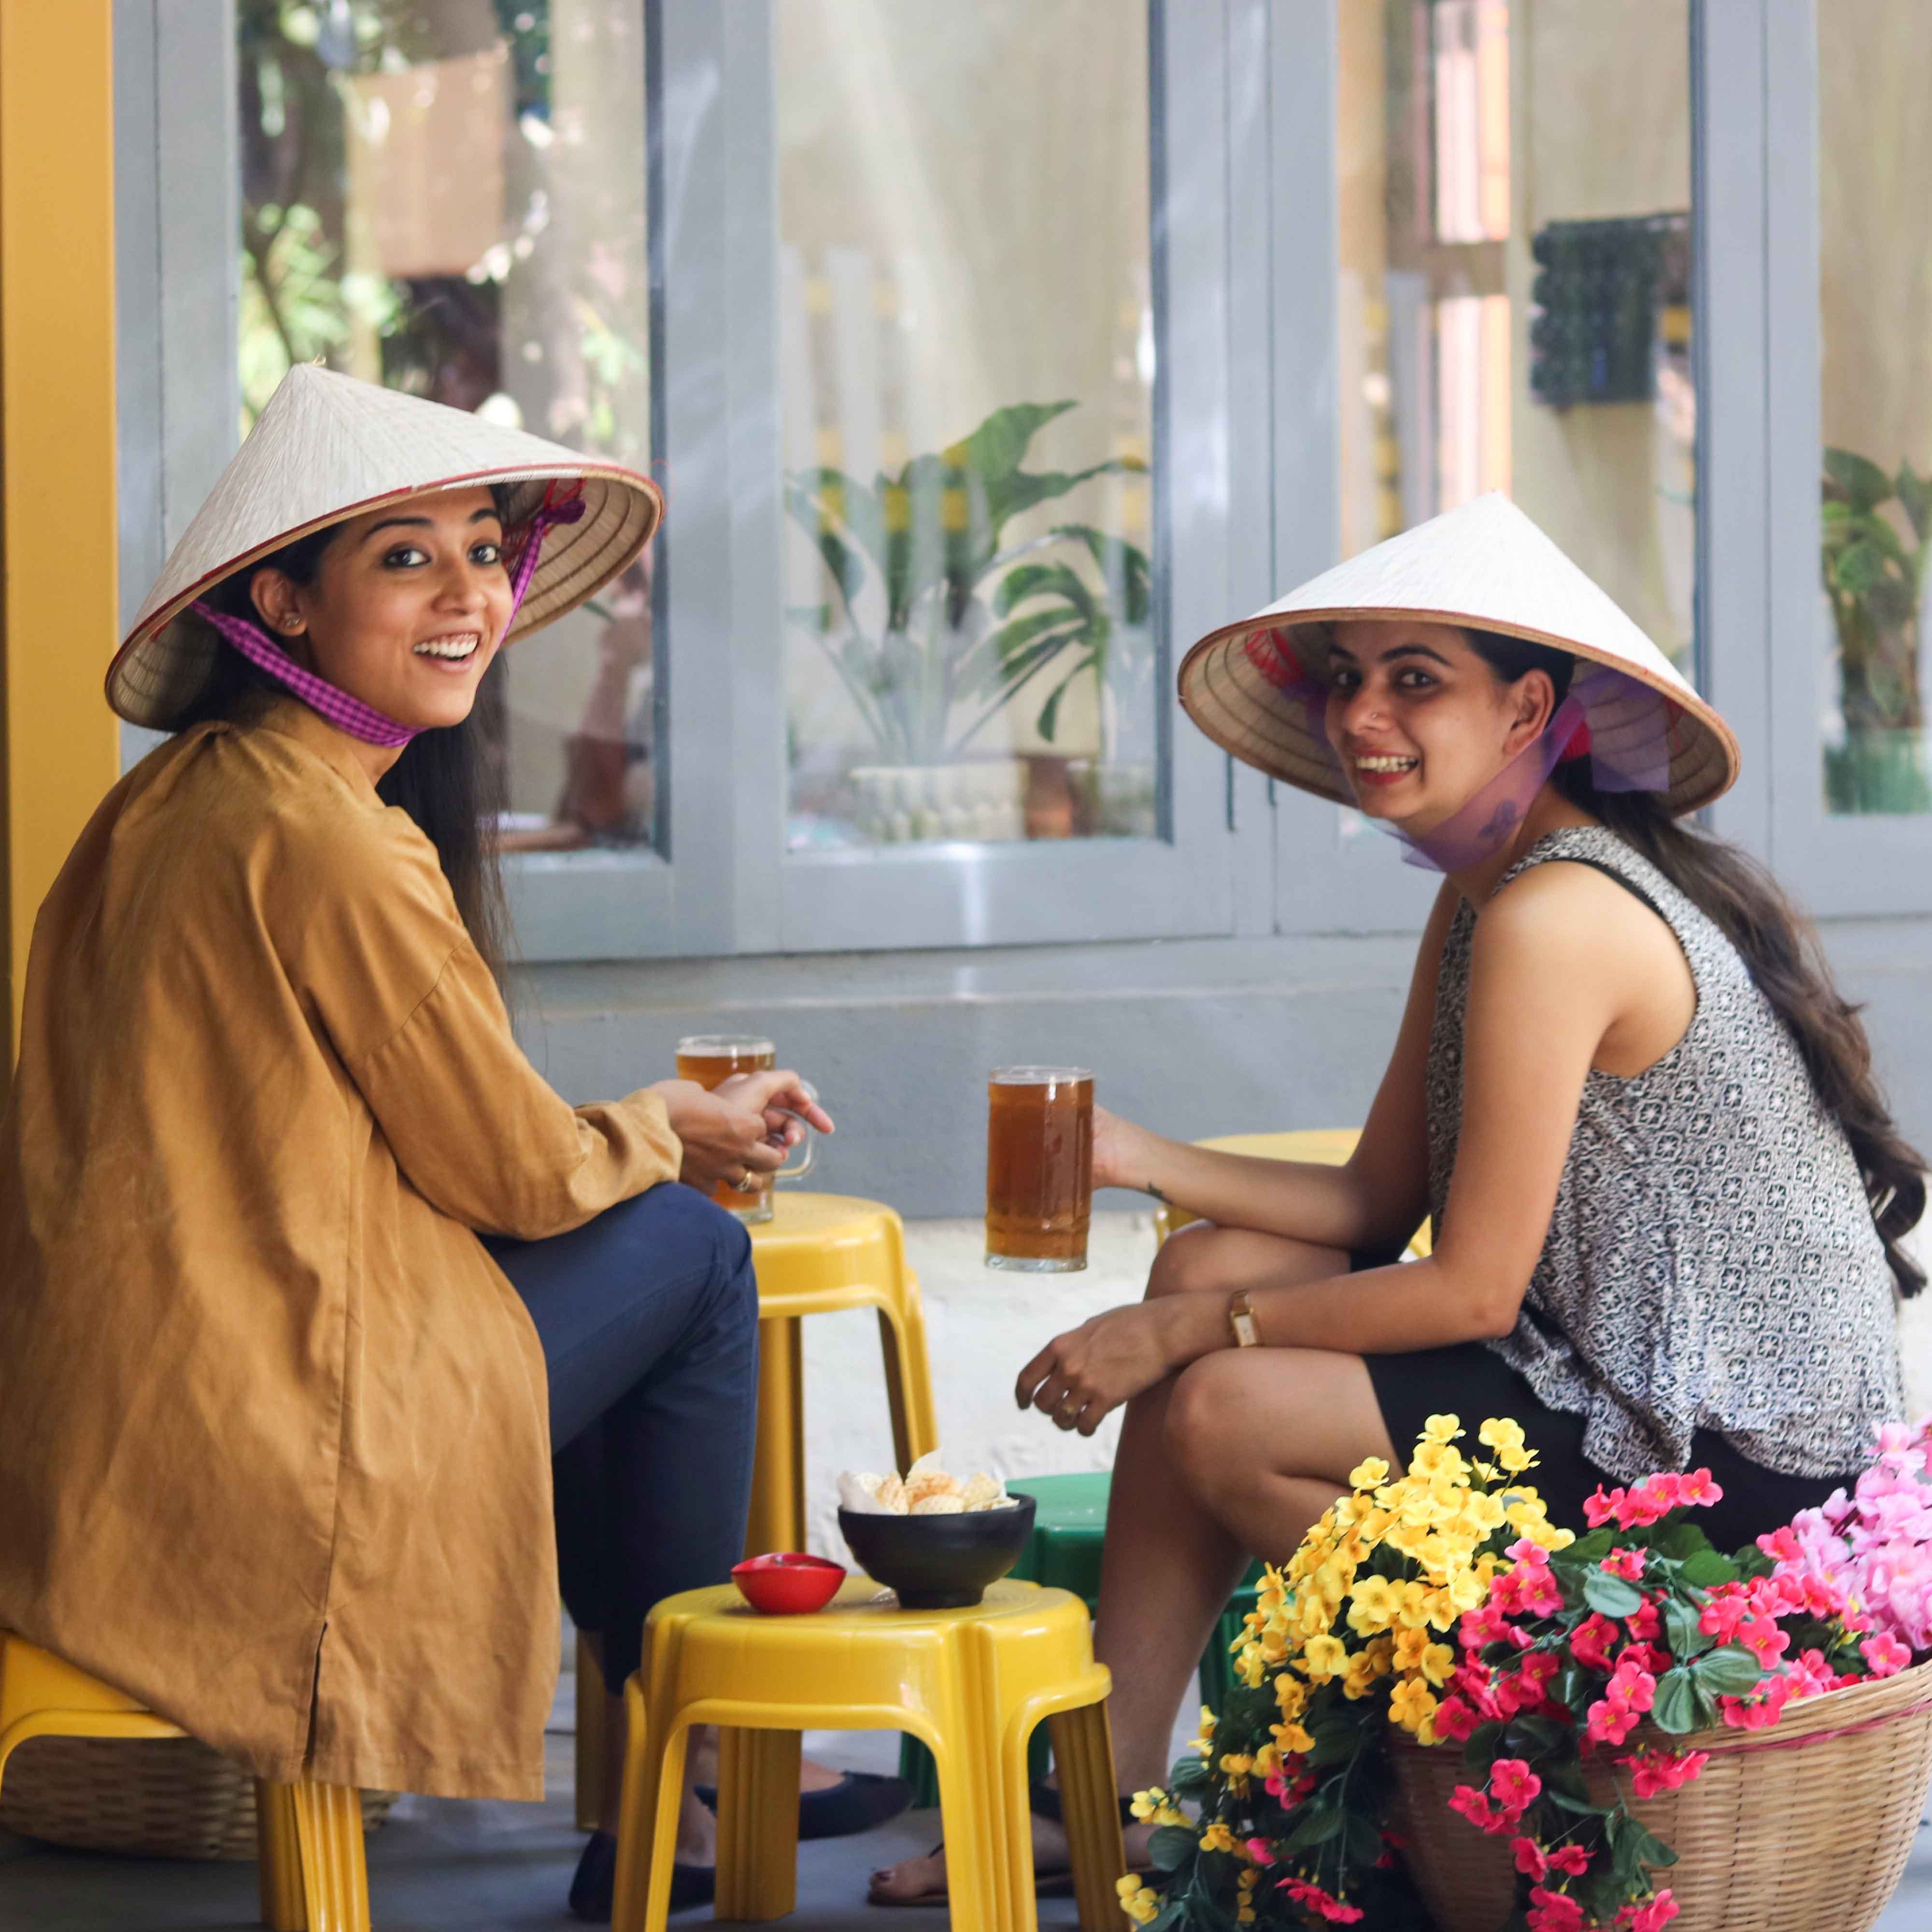 Enjoy The Glorious Food & Vibe Of This Vietnamese Beer Garden When In Goa